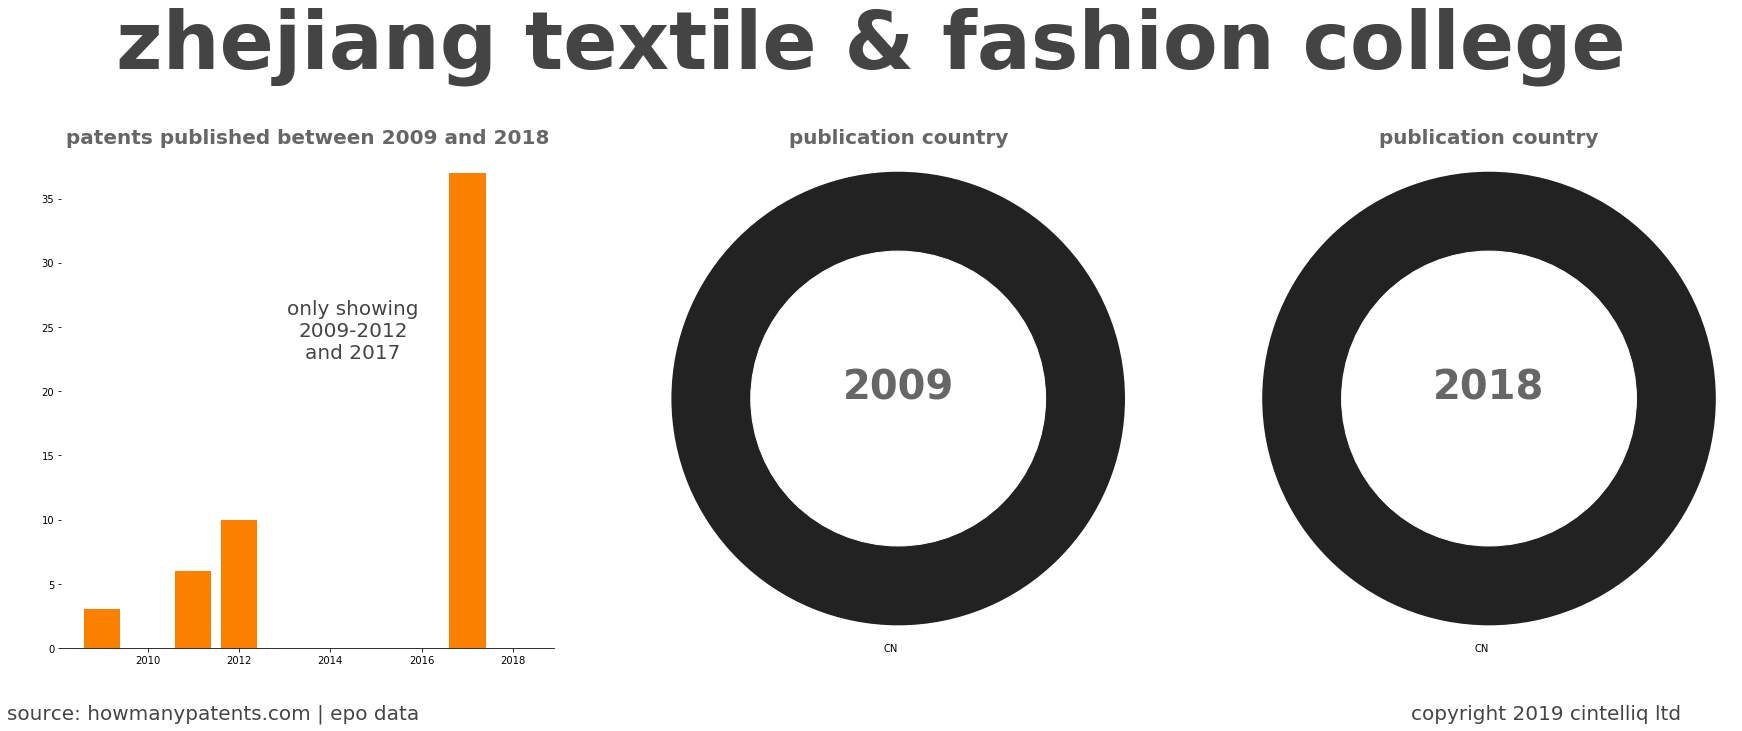 summary of patents for Zhejiang Textile & Fashion College